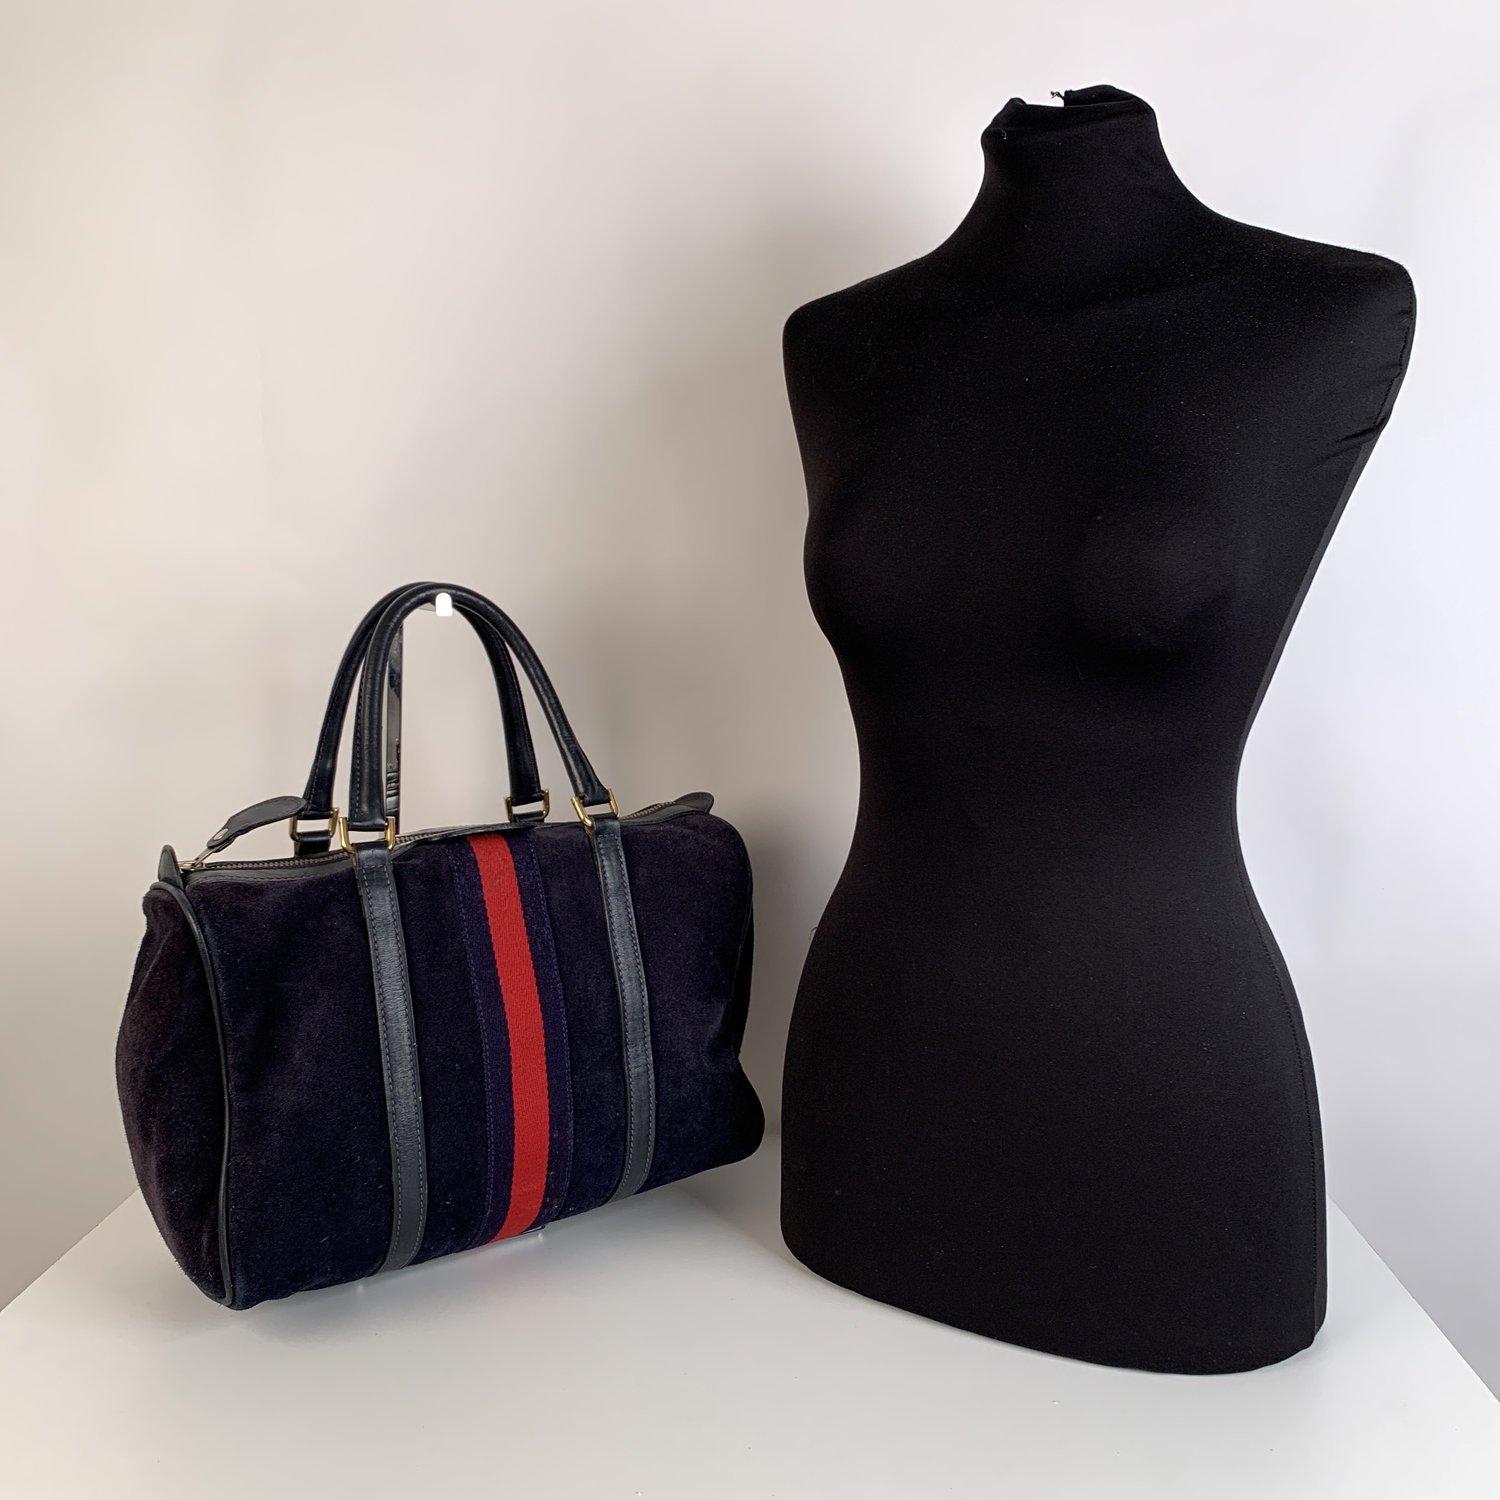 MATERIAL: Suede COLOR: Blue MODEL: Boston Bag GENDER: Women SIZE: Medium Condition B - VERY GOOD Some normal wear of use on suede due to normal use, some wear of use on bottom corners, some normal wear of use inside Measurements BAG HEIGHT: 8.5